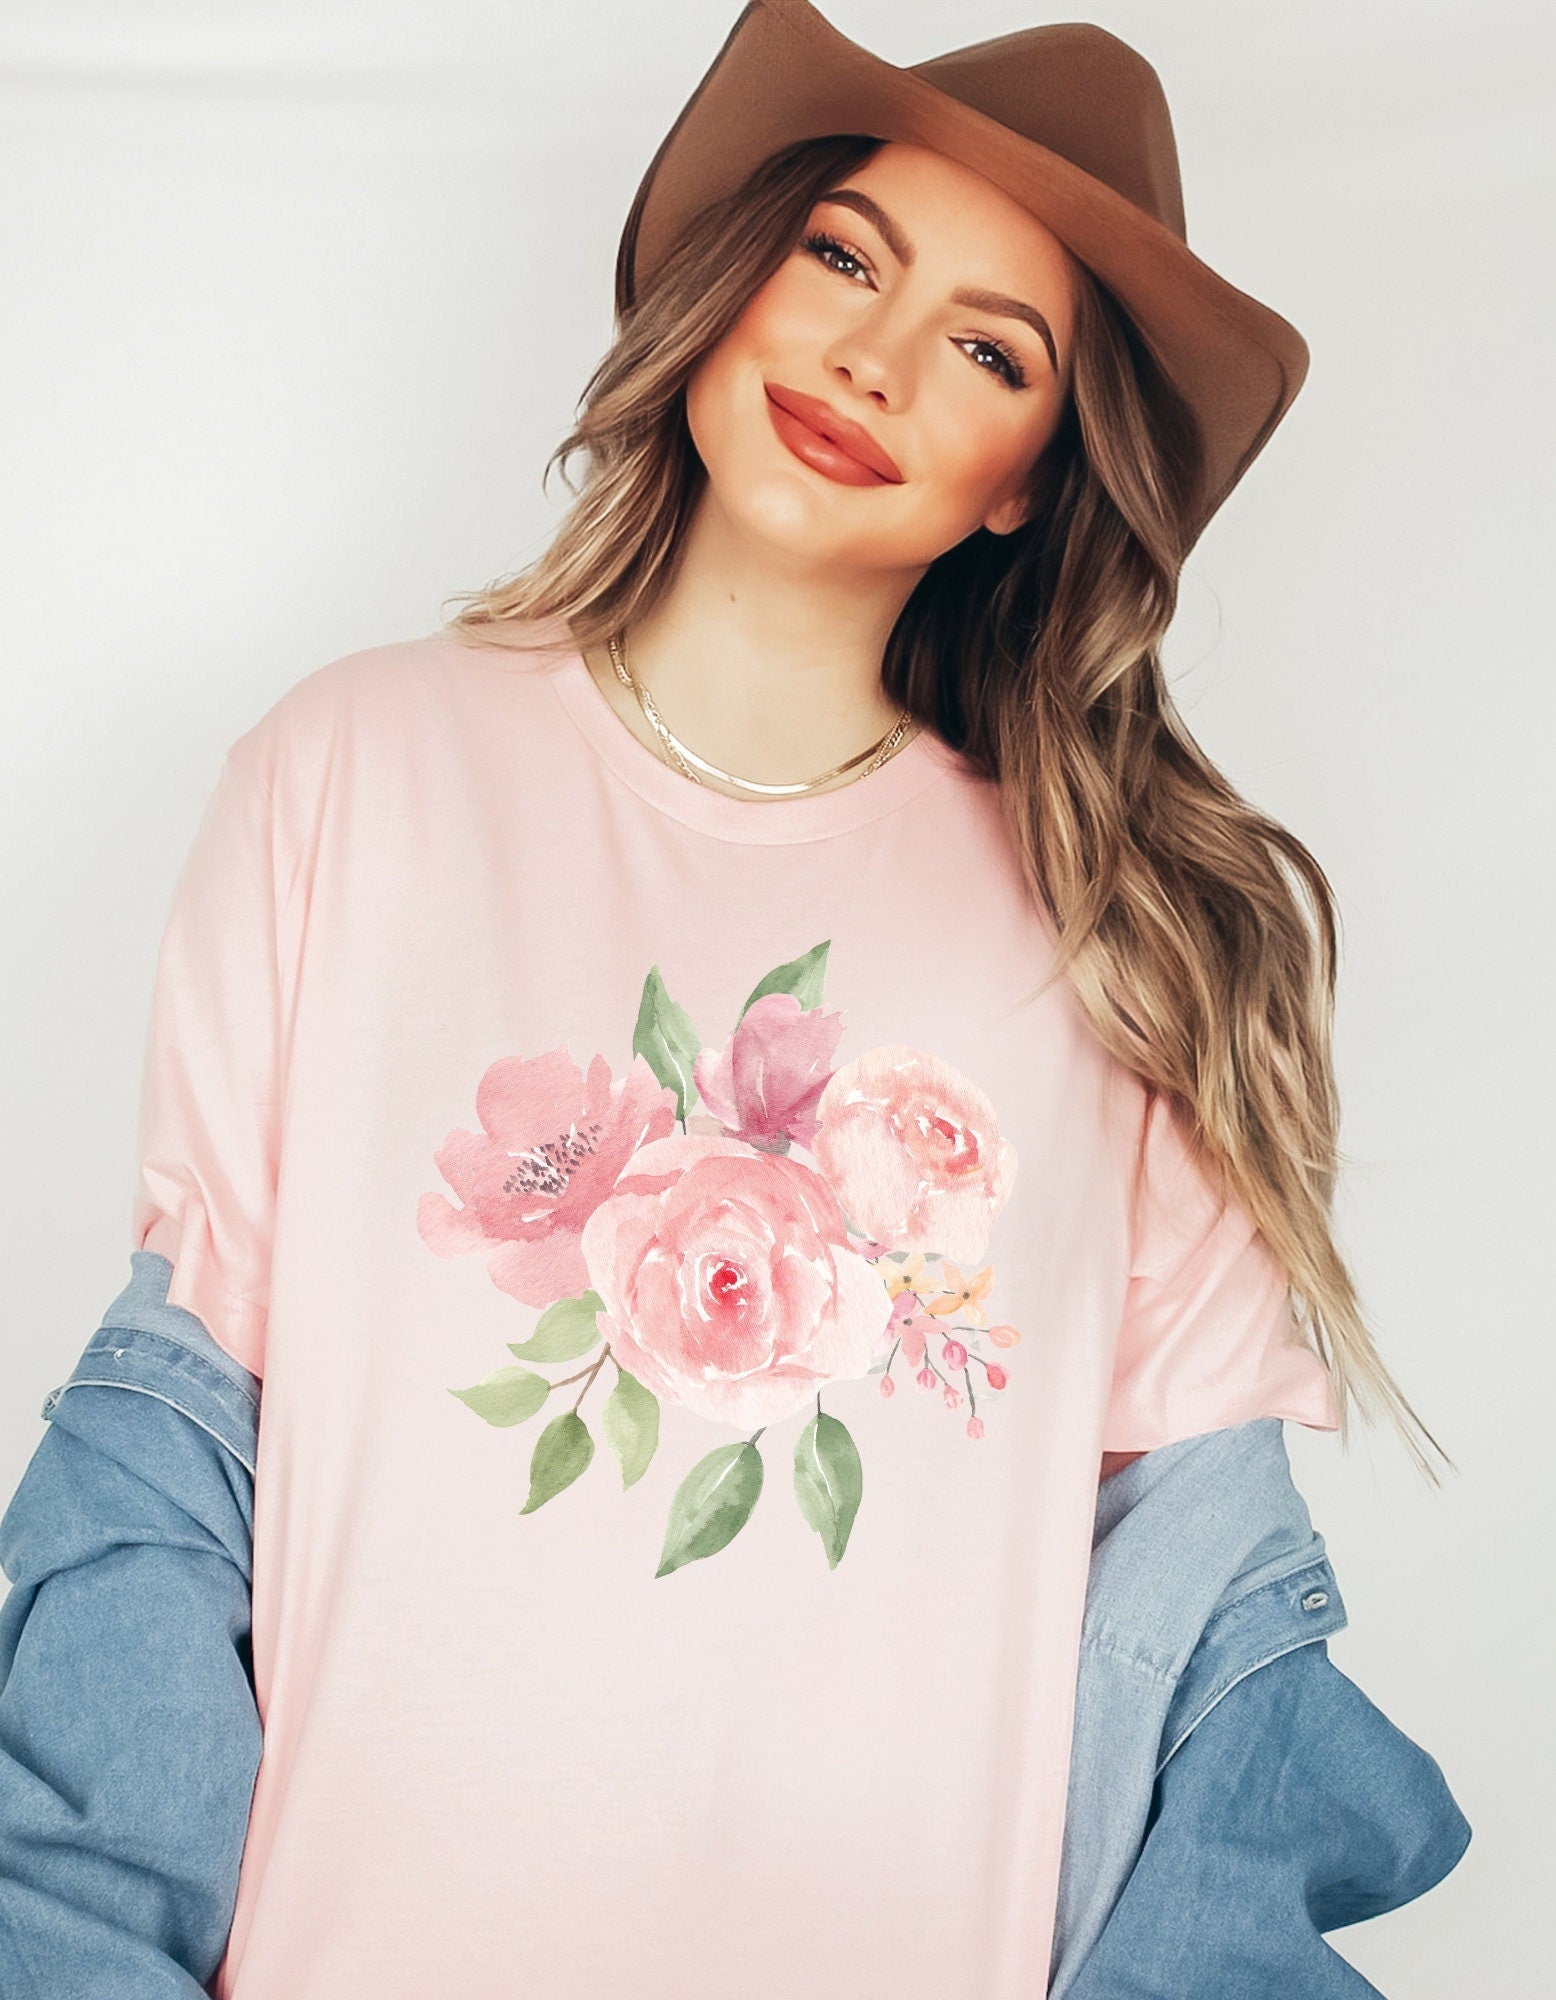 Unisex Jersey Watercolor Flower Tee, Floral T-Shirt, Mother's Gift T-Shirt, Colorful Cute T-Shirt